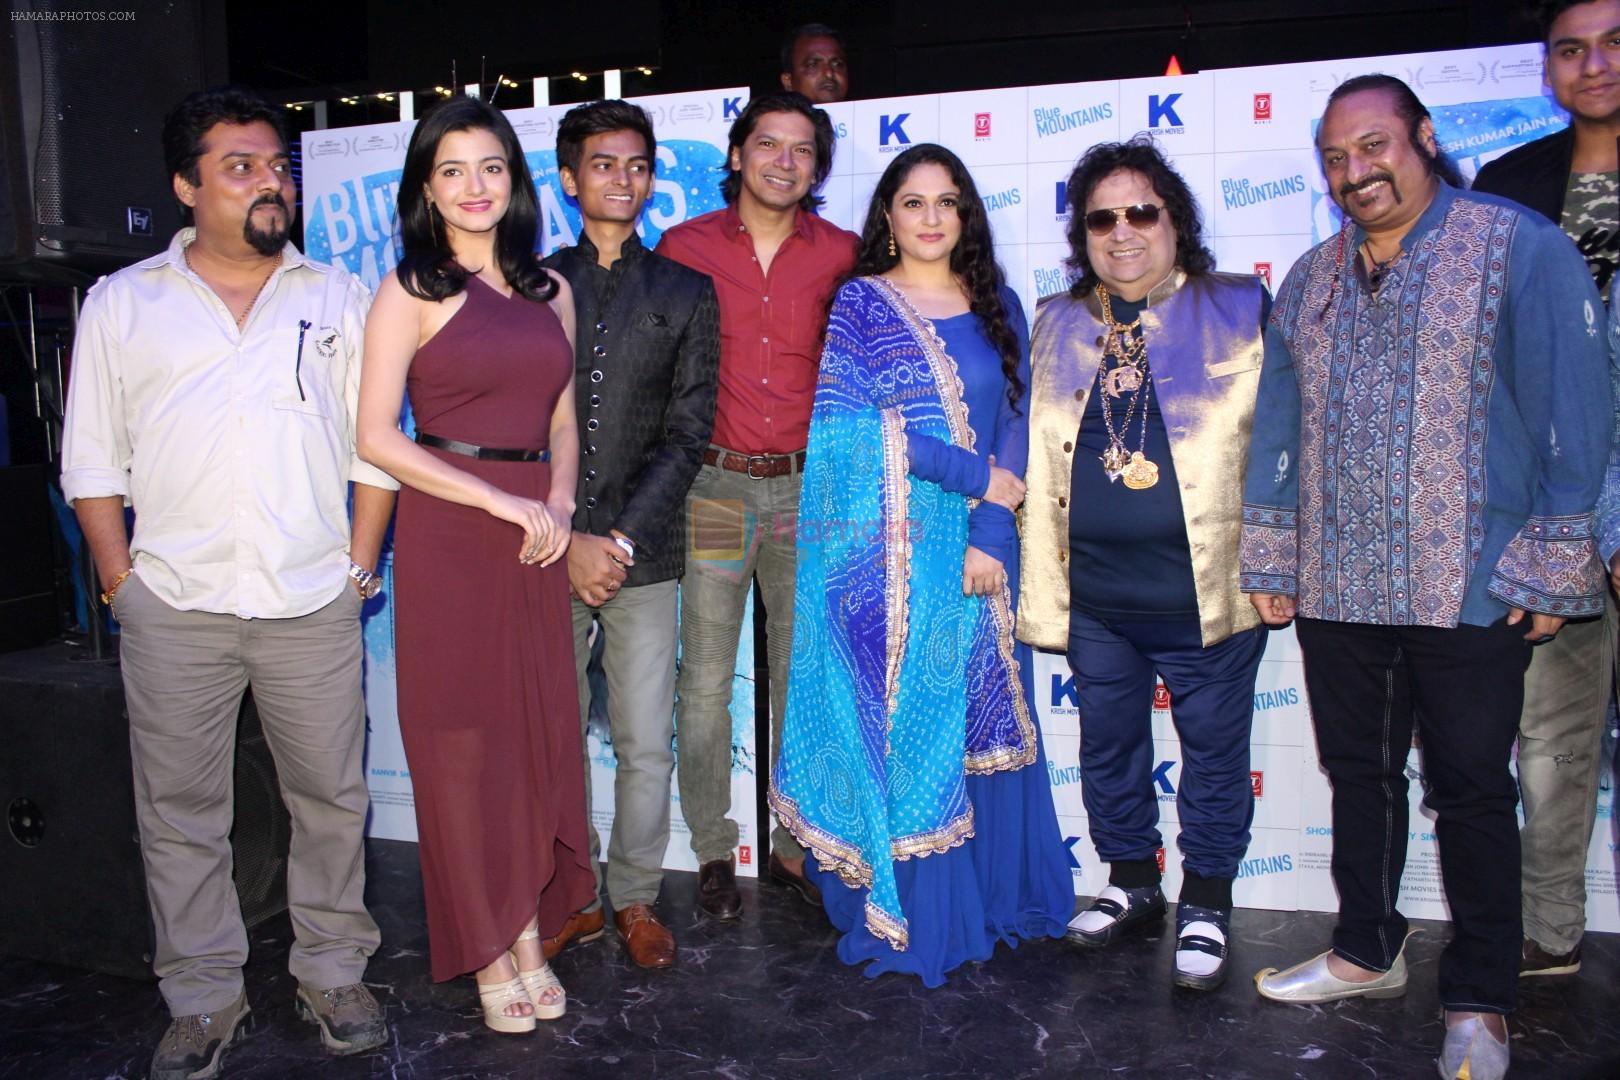 Bappi Lahiri, Gracy Singh at the Music Launch Of Movie Blue Mountain on 21st March 2017